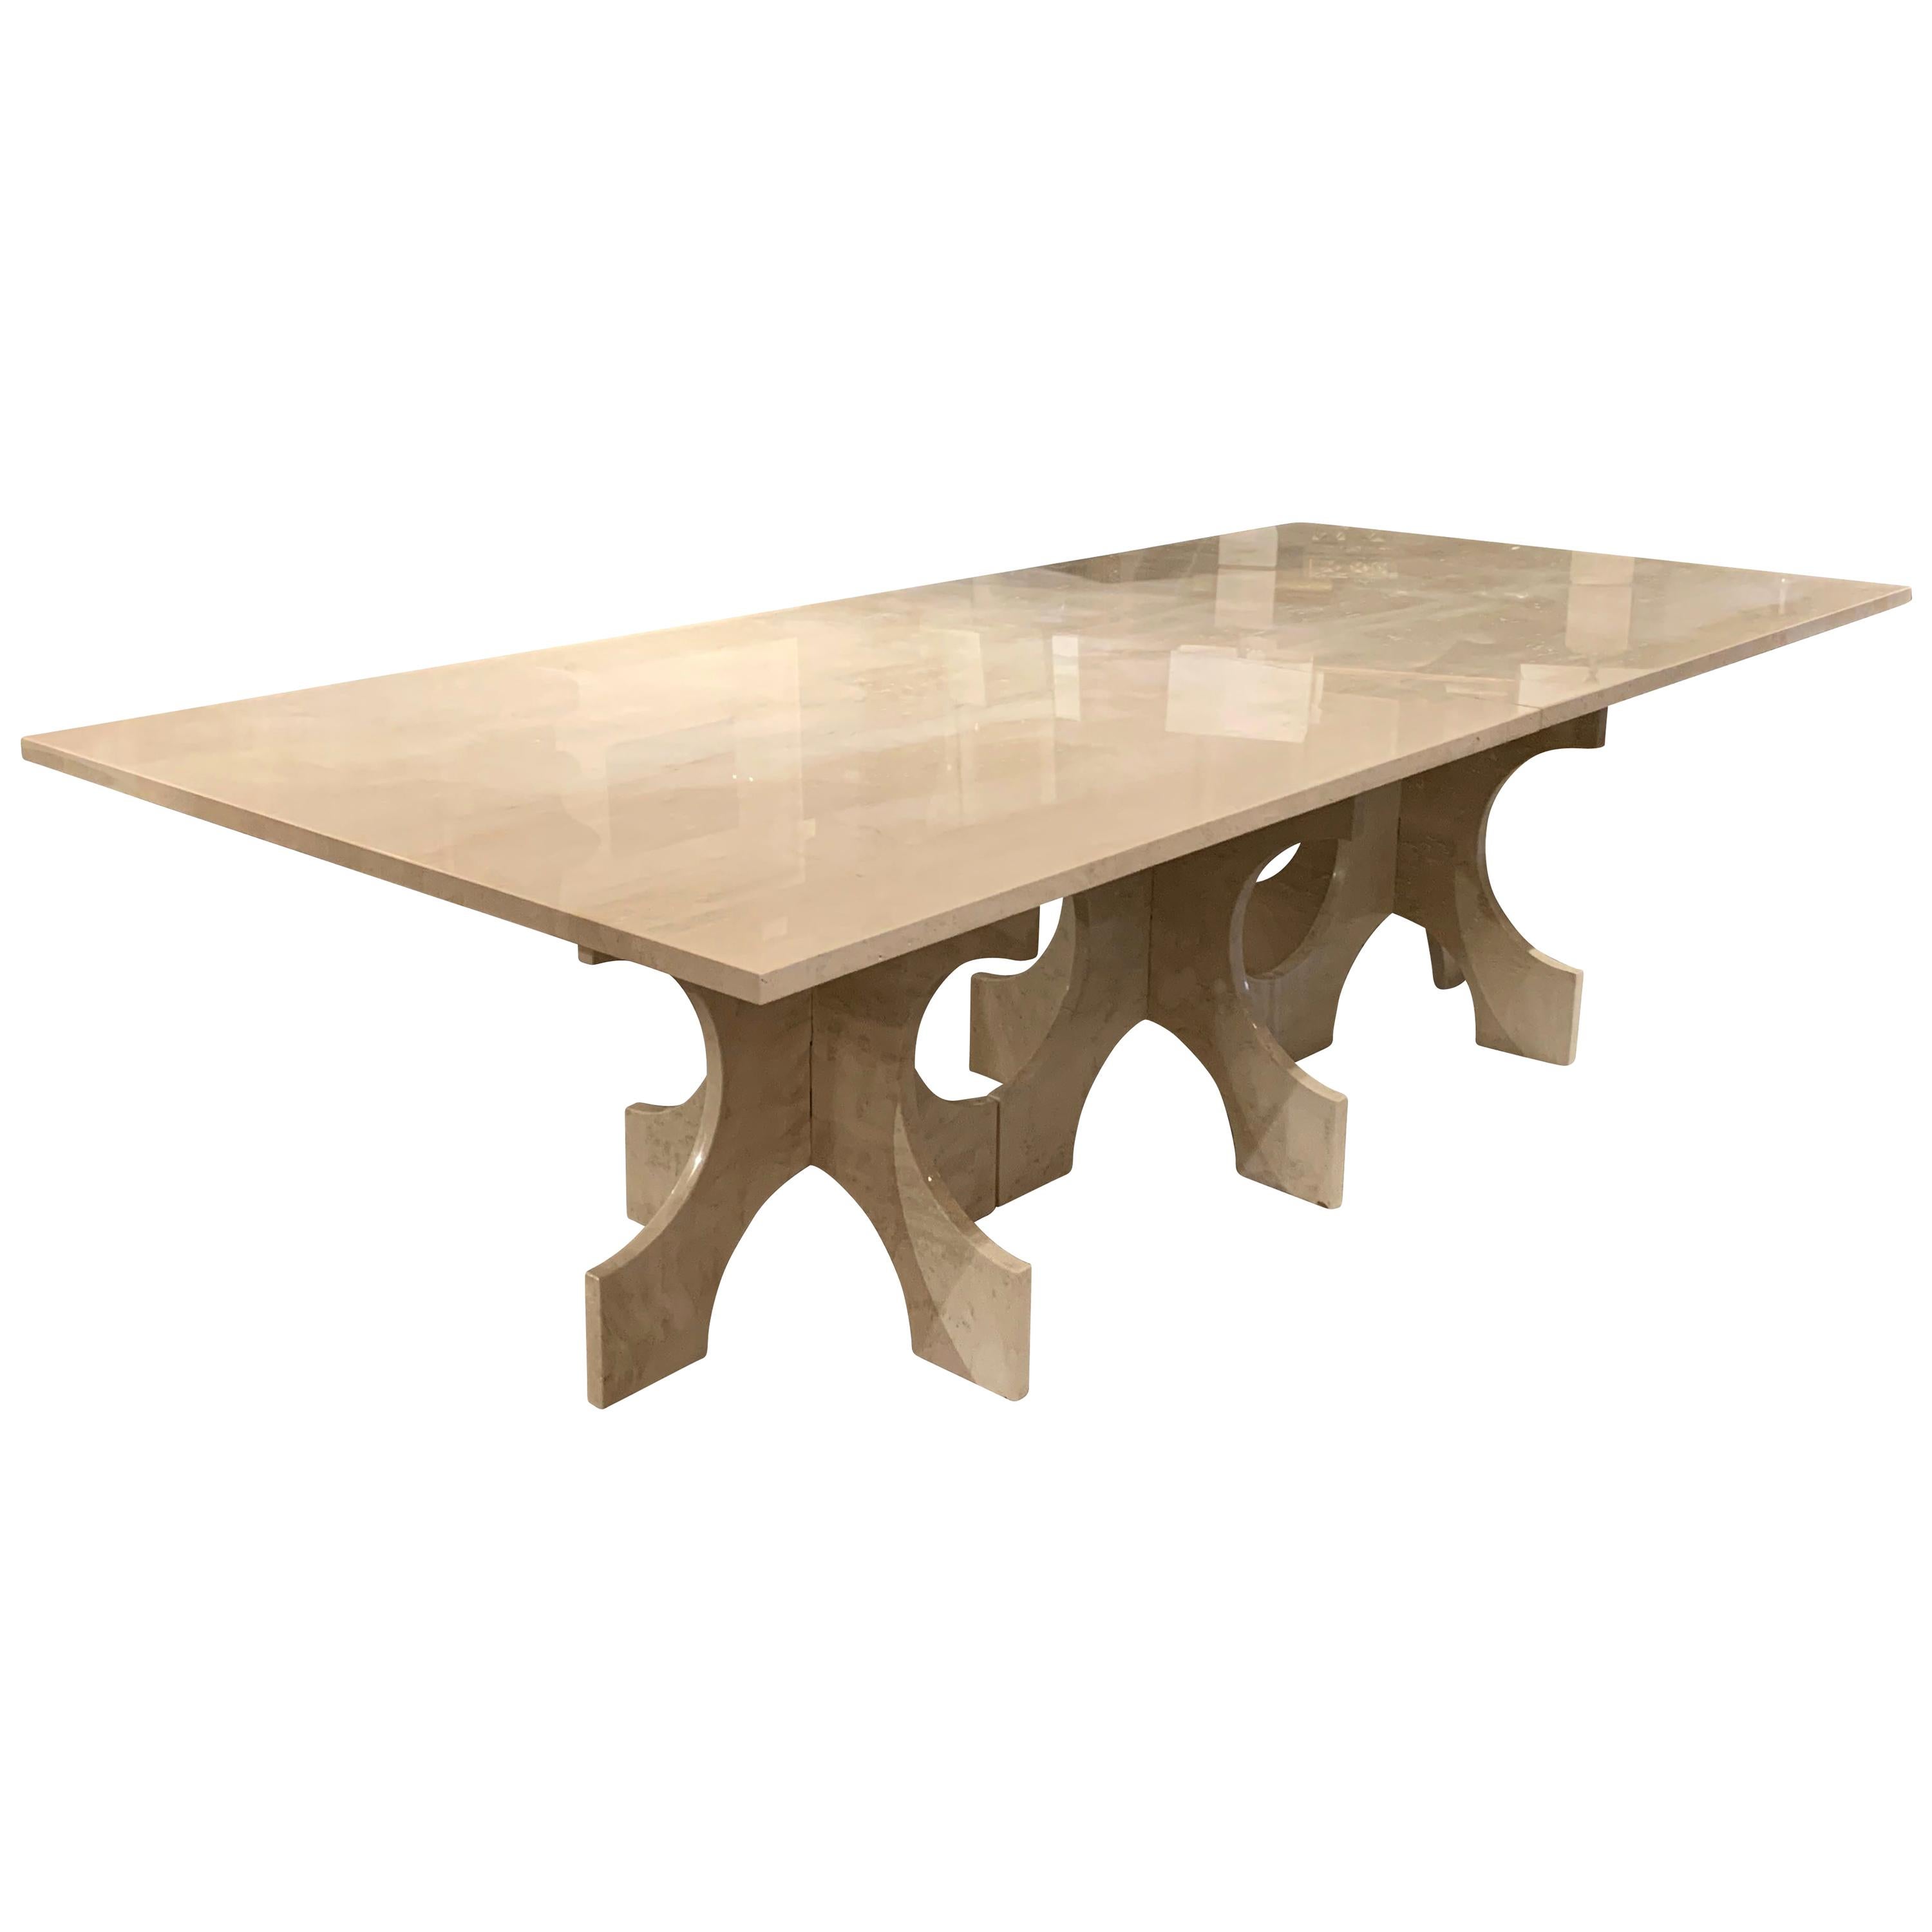 Bespoke White Travertine Dining Table, United States, Contemporary